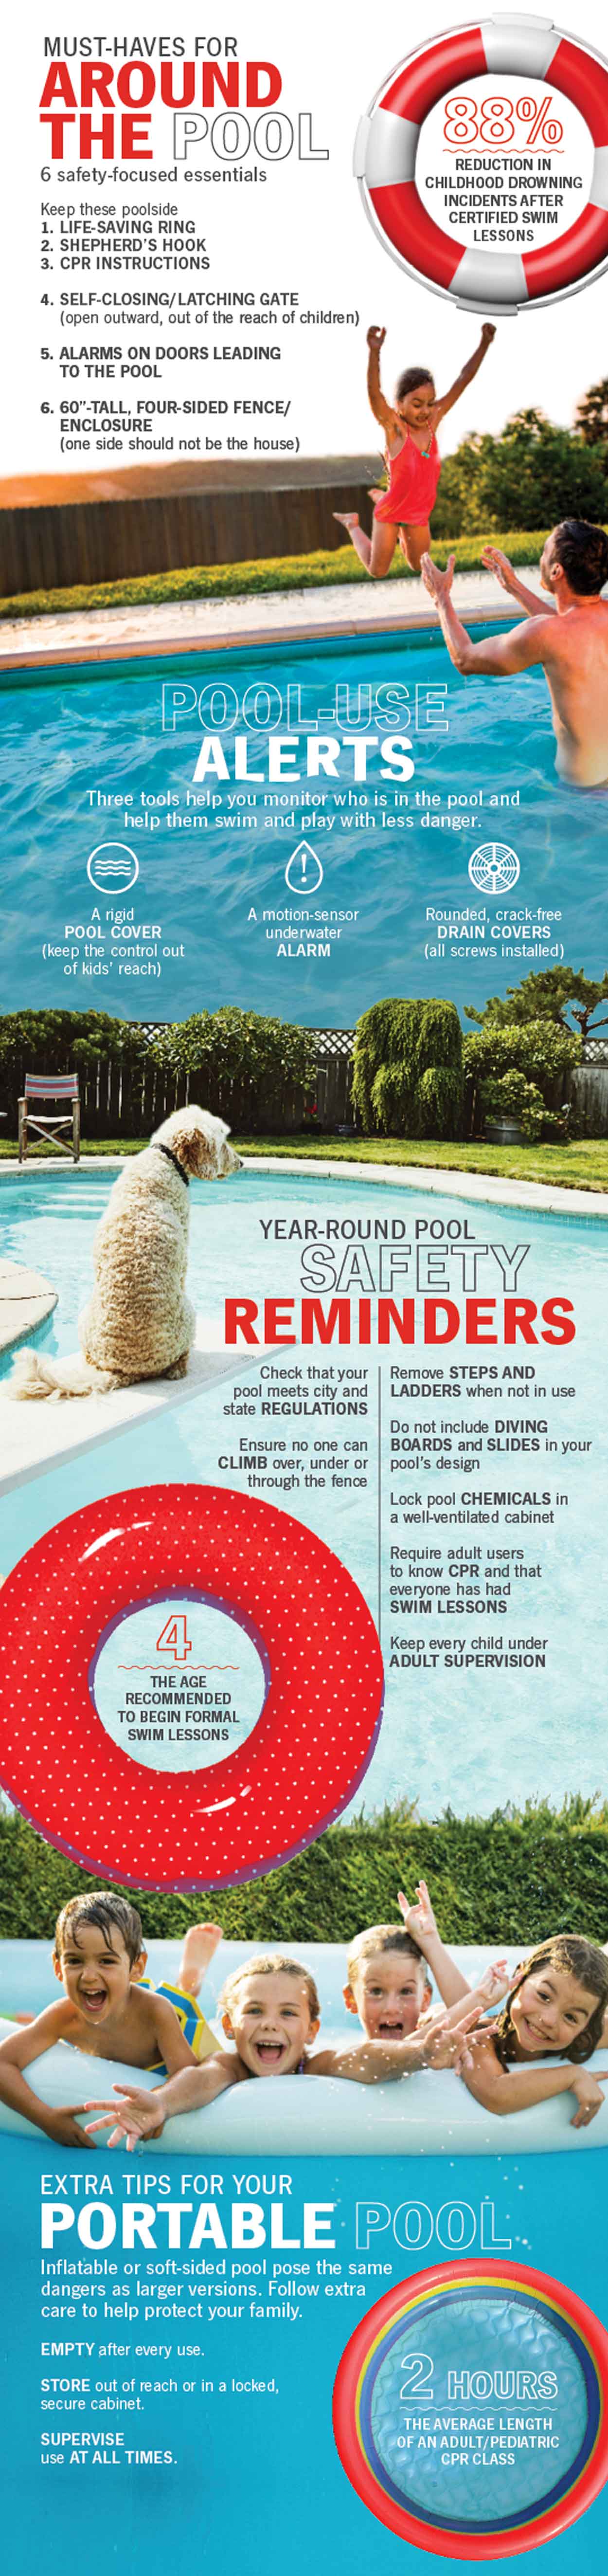 infographic about backyard swimming pool safety tips